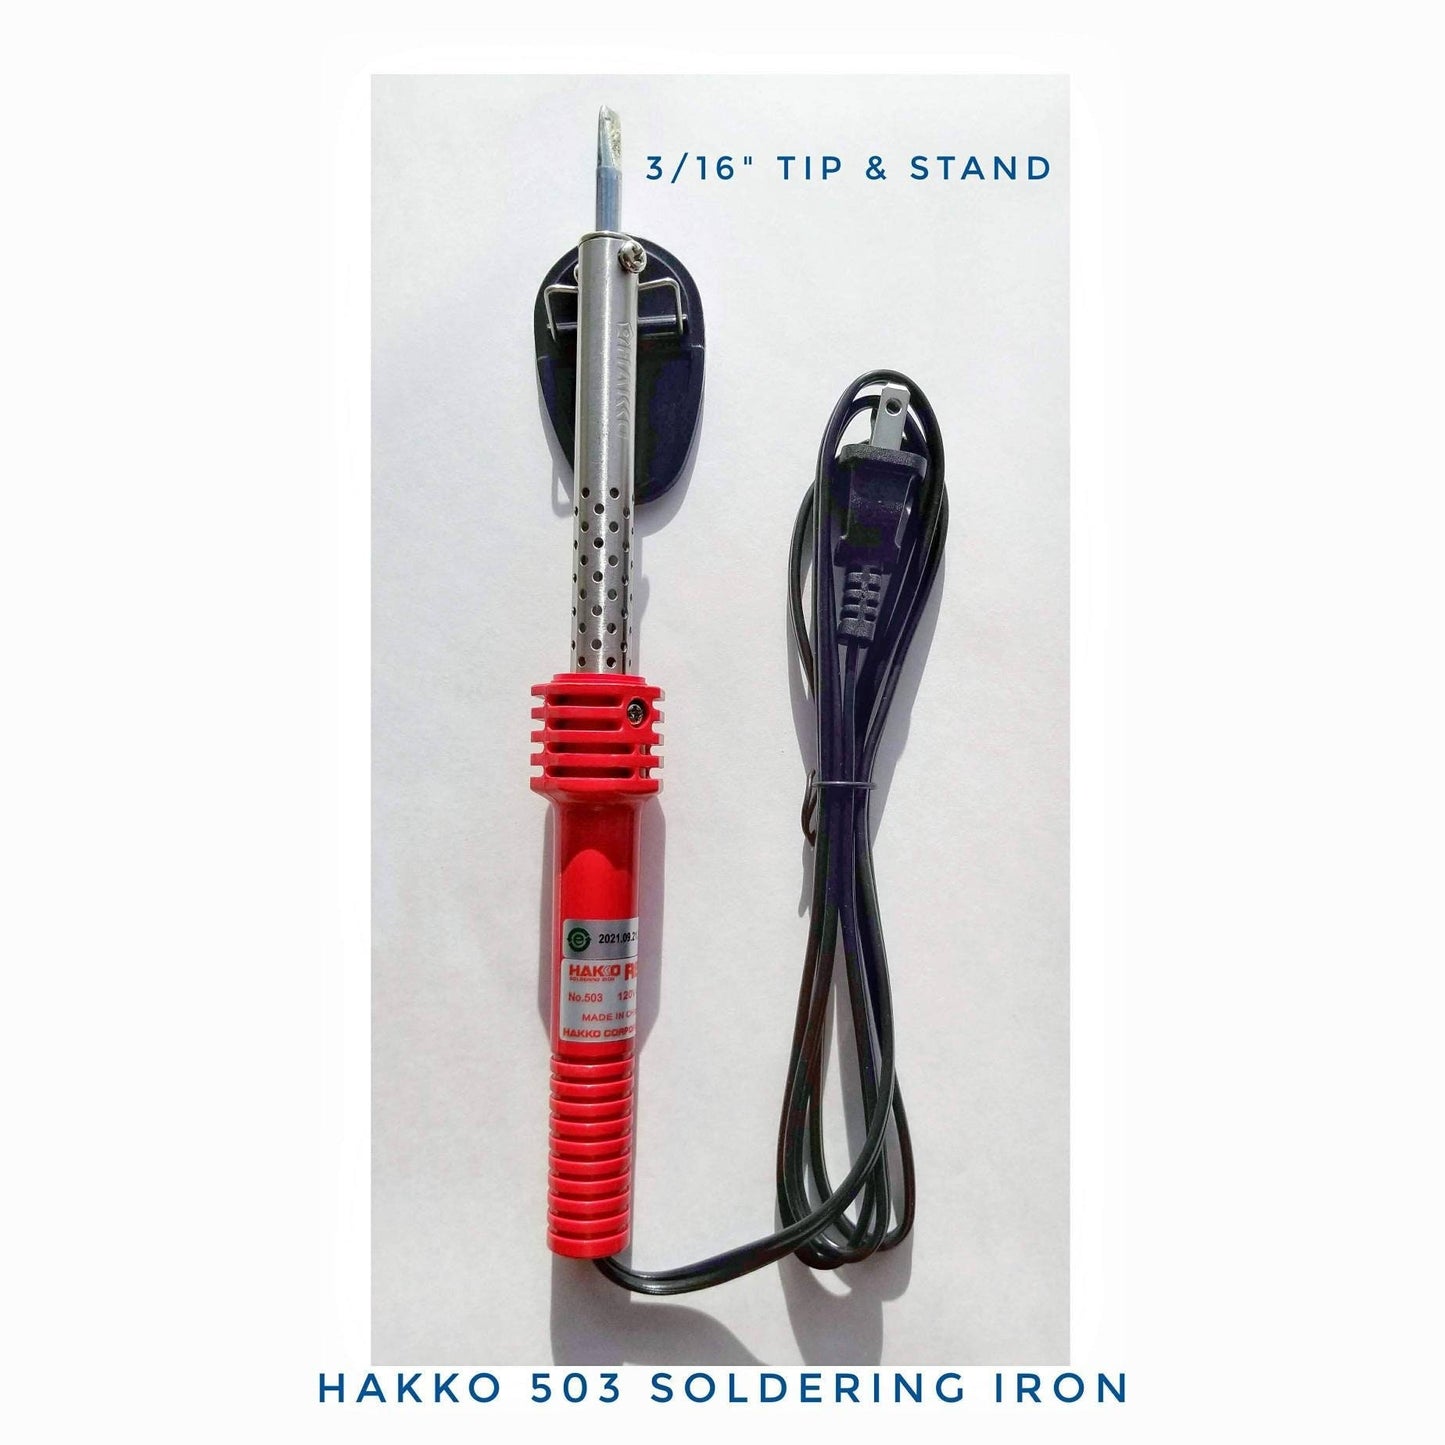 Soldering Iron, Hakko for Stained Glass Art & Jewelry. Stand Holder-Rest included. 900F degrees, 3/16" tip. Great for copper foil, beginner.